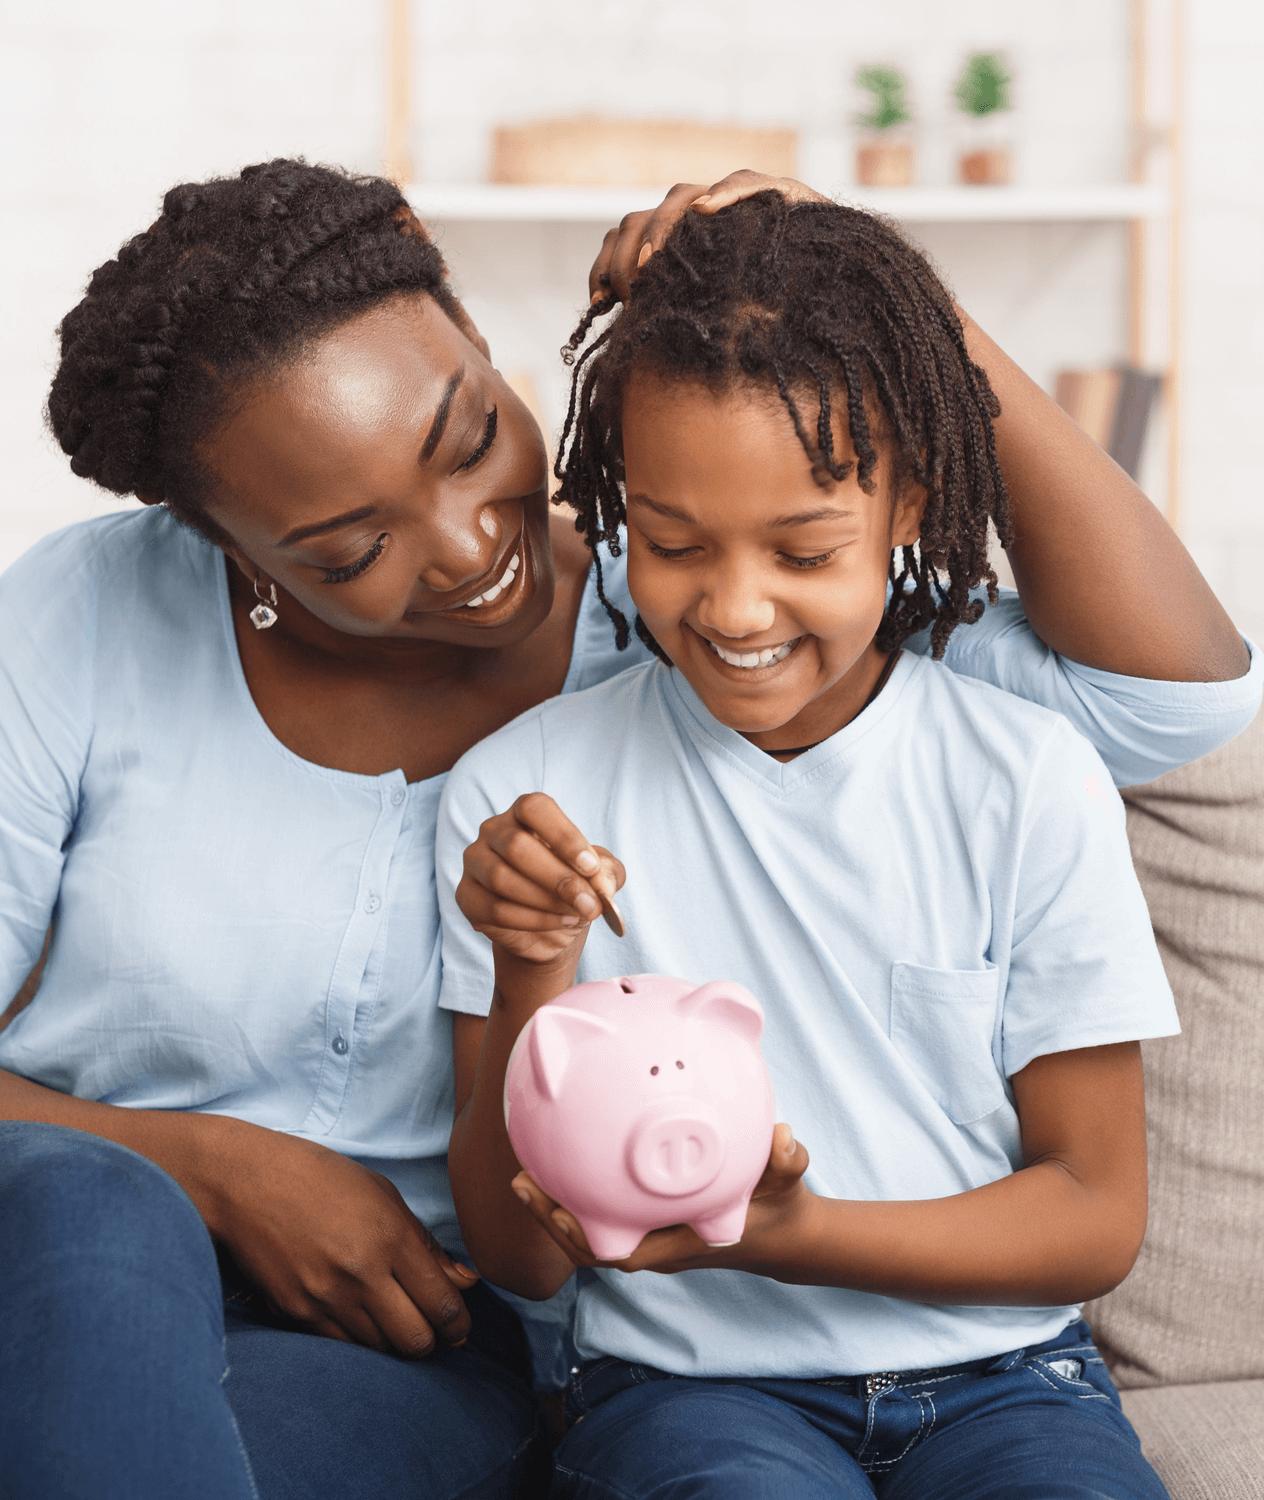 African American mother shows her young child how to use a piggy bank.